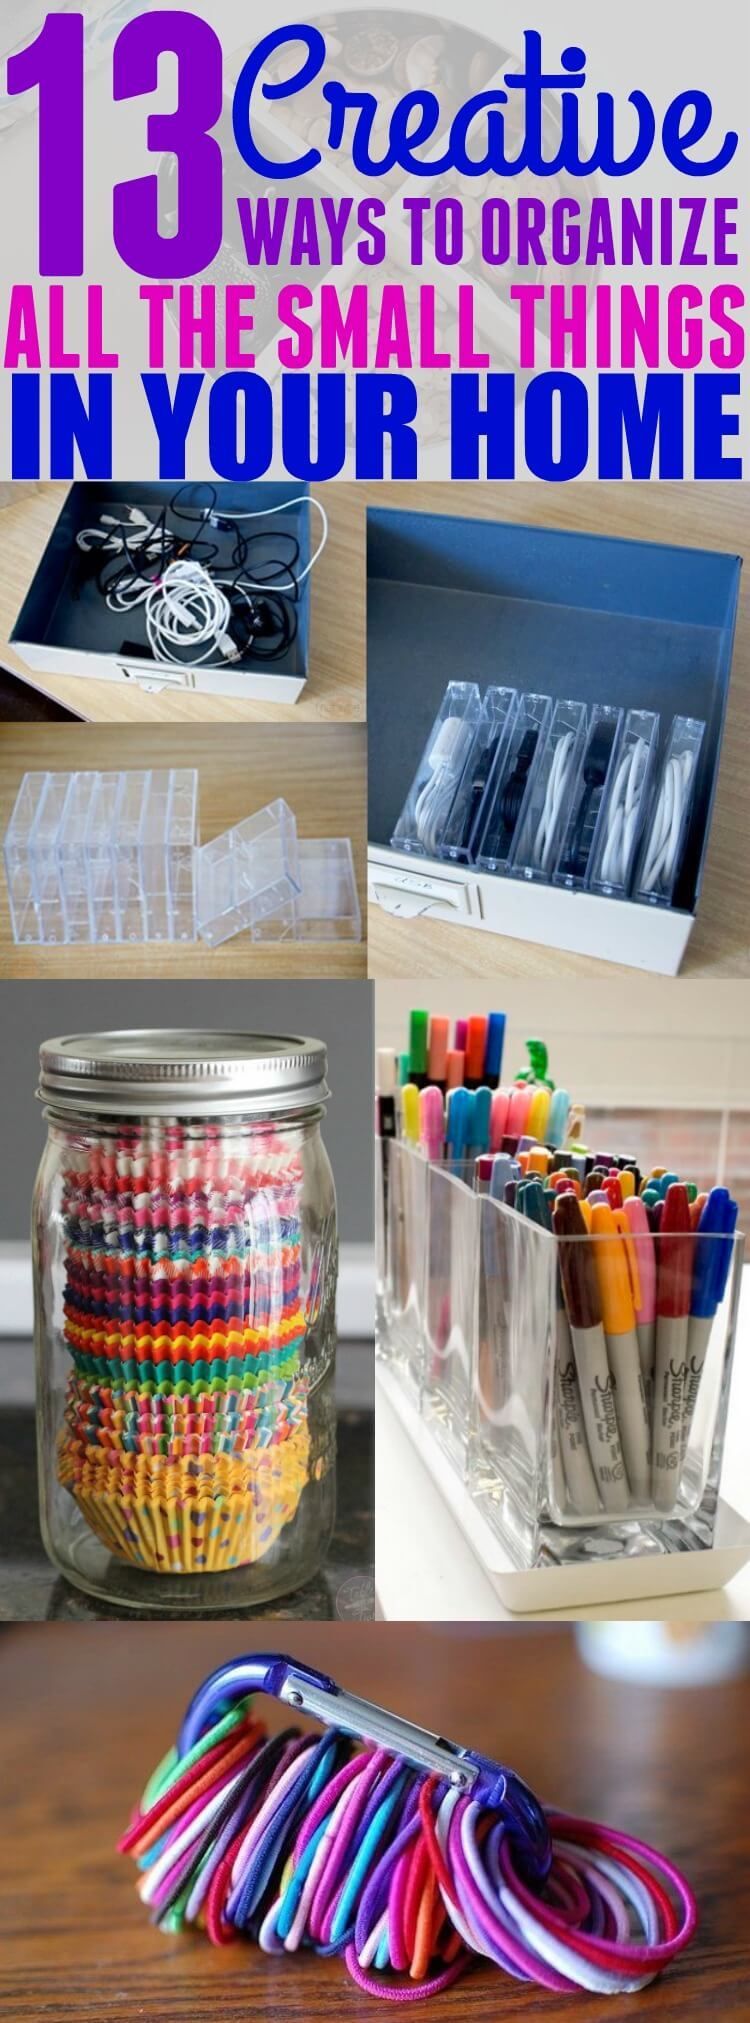 13 Brilliant Ways to Organize All The Small Things In Your Home -   21 DIY Clothes Organization articles
 ideas